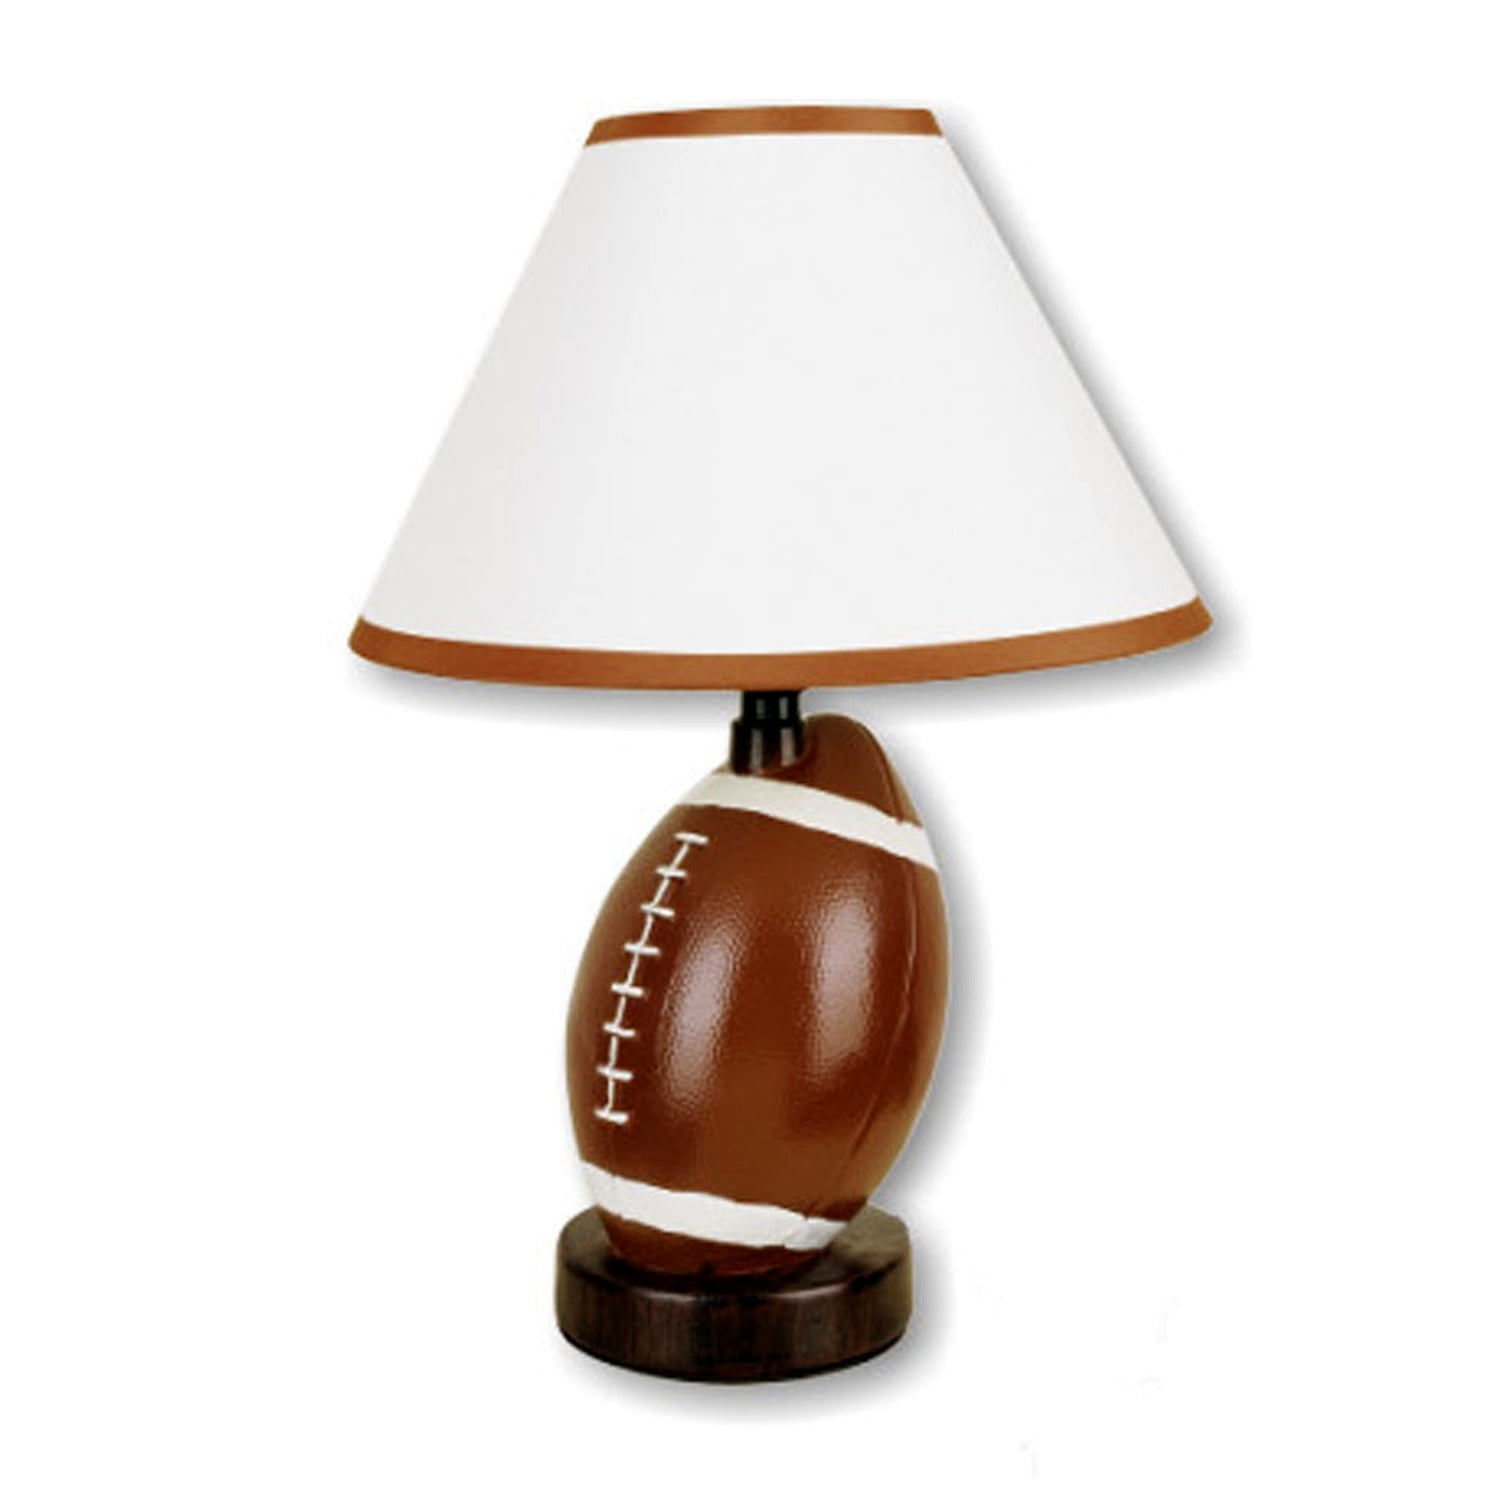 Lite Source IK-6100 Table Lamp with White Fabric Shades Brown Finish 9 x 9 x 11.5